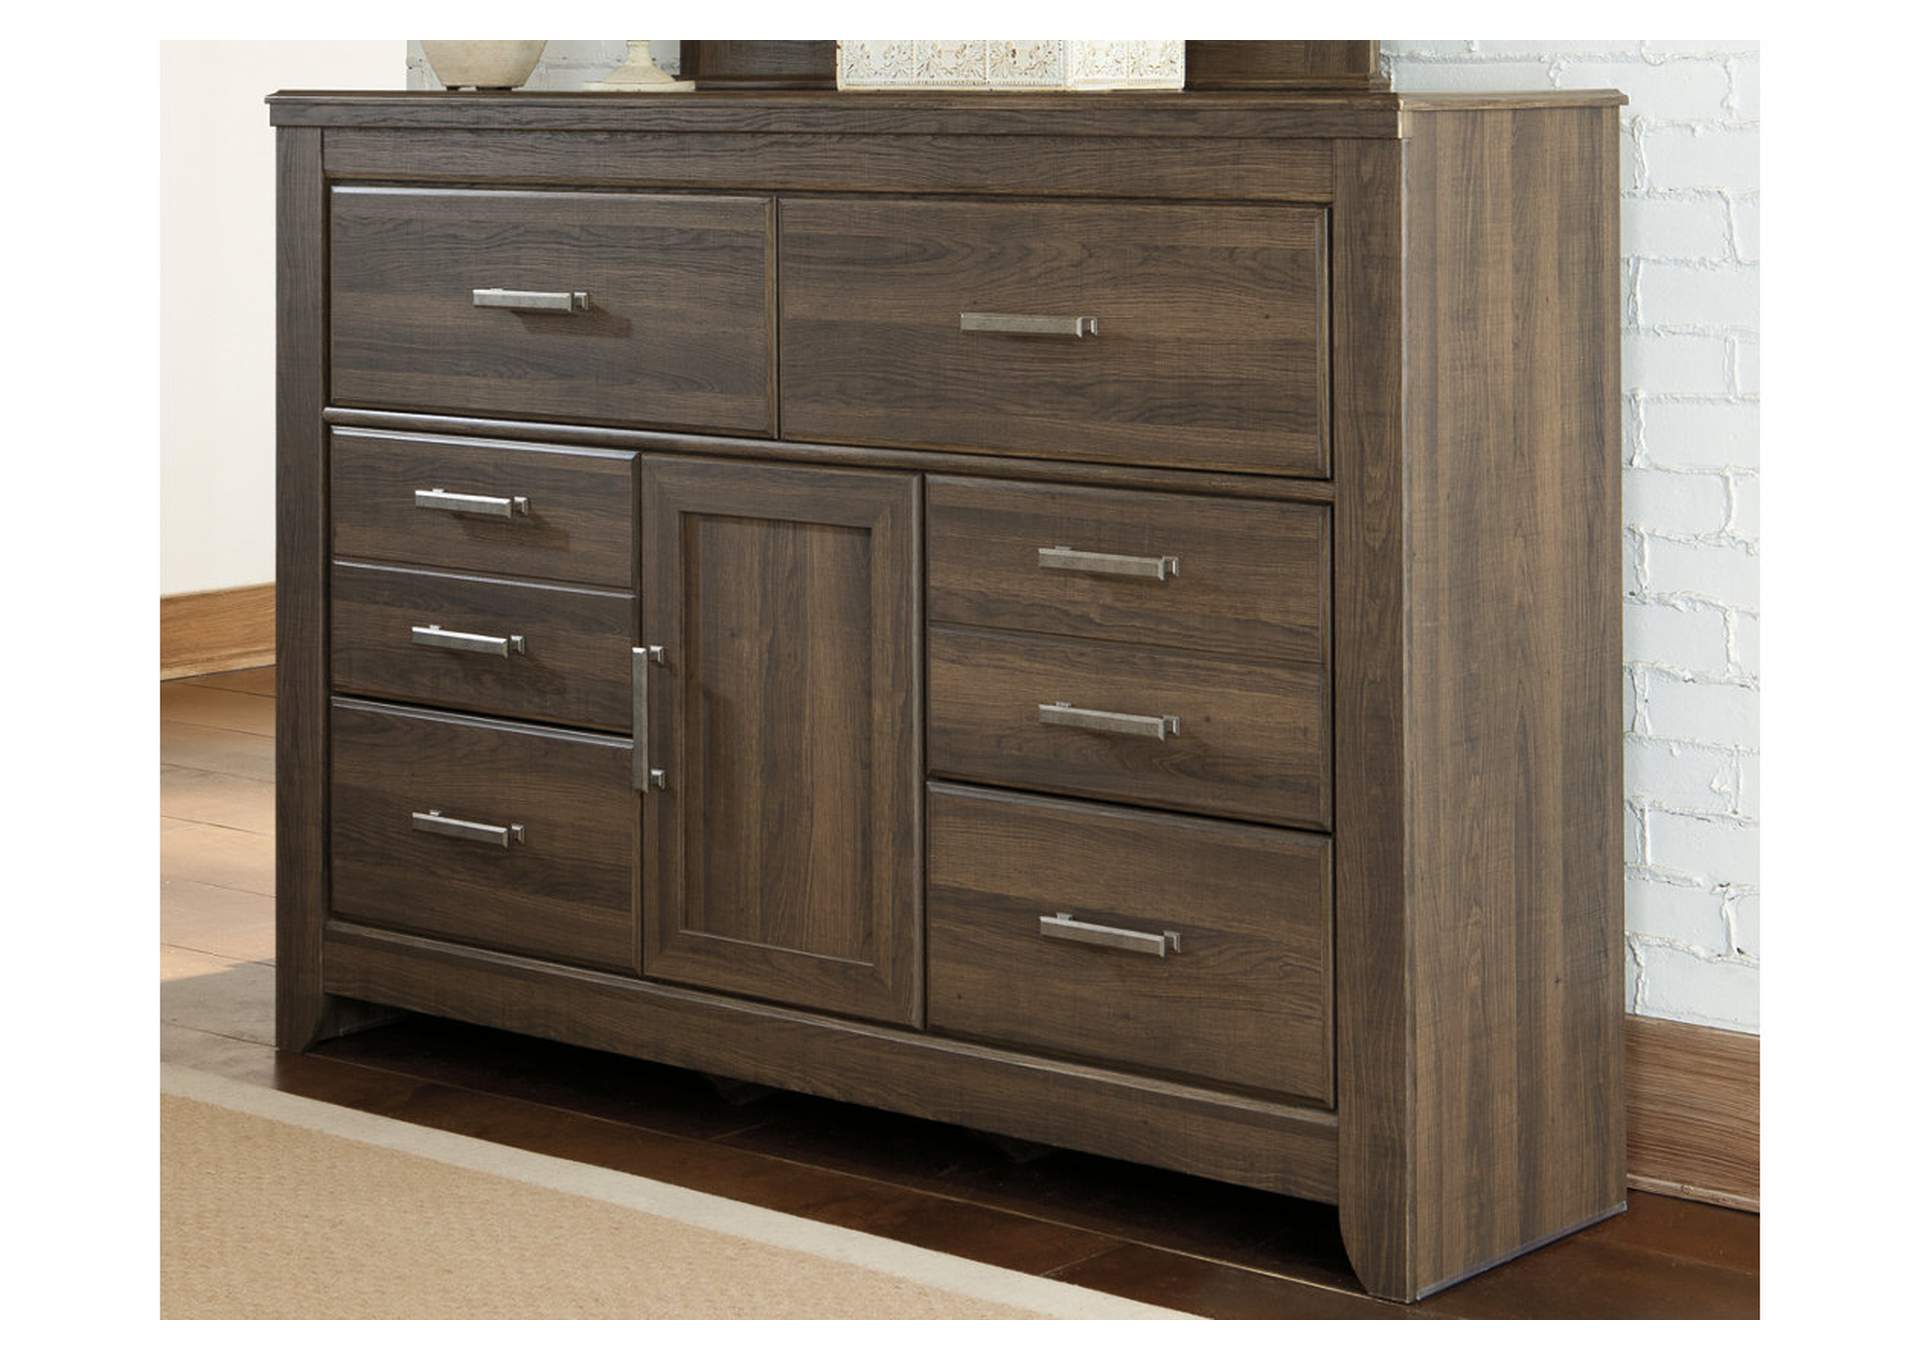 Juararo Queen Panel Bed with Dresser,Signature Design By Ashley